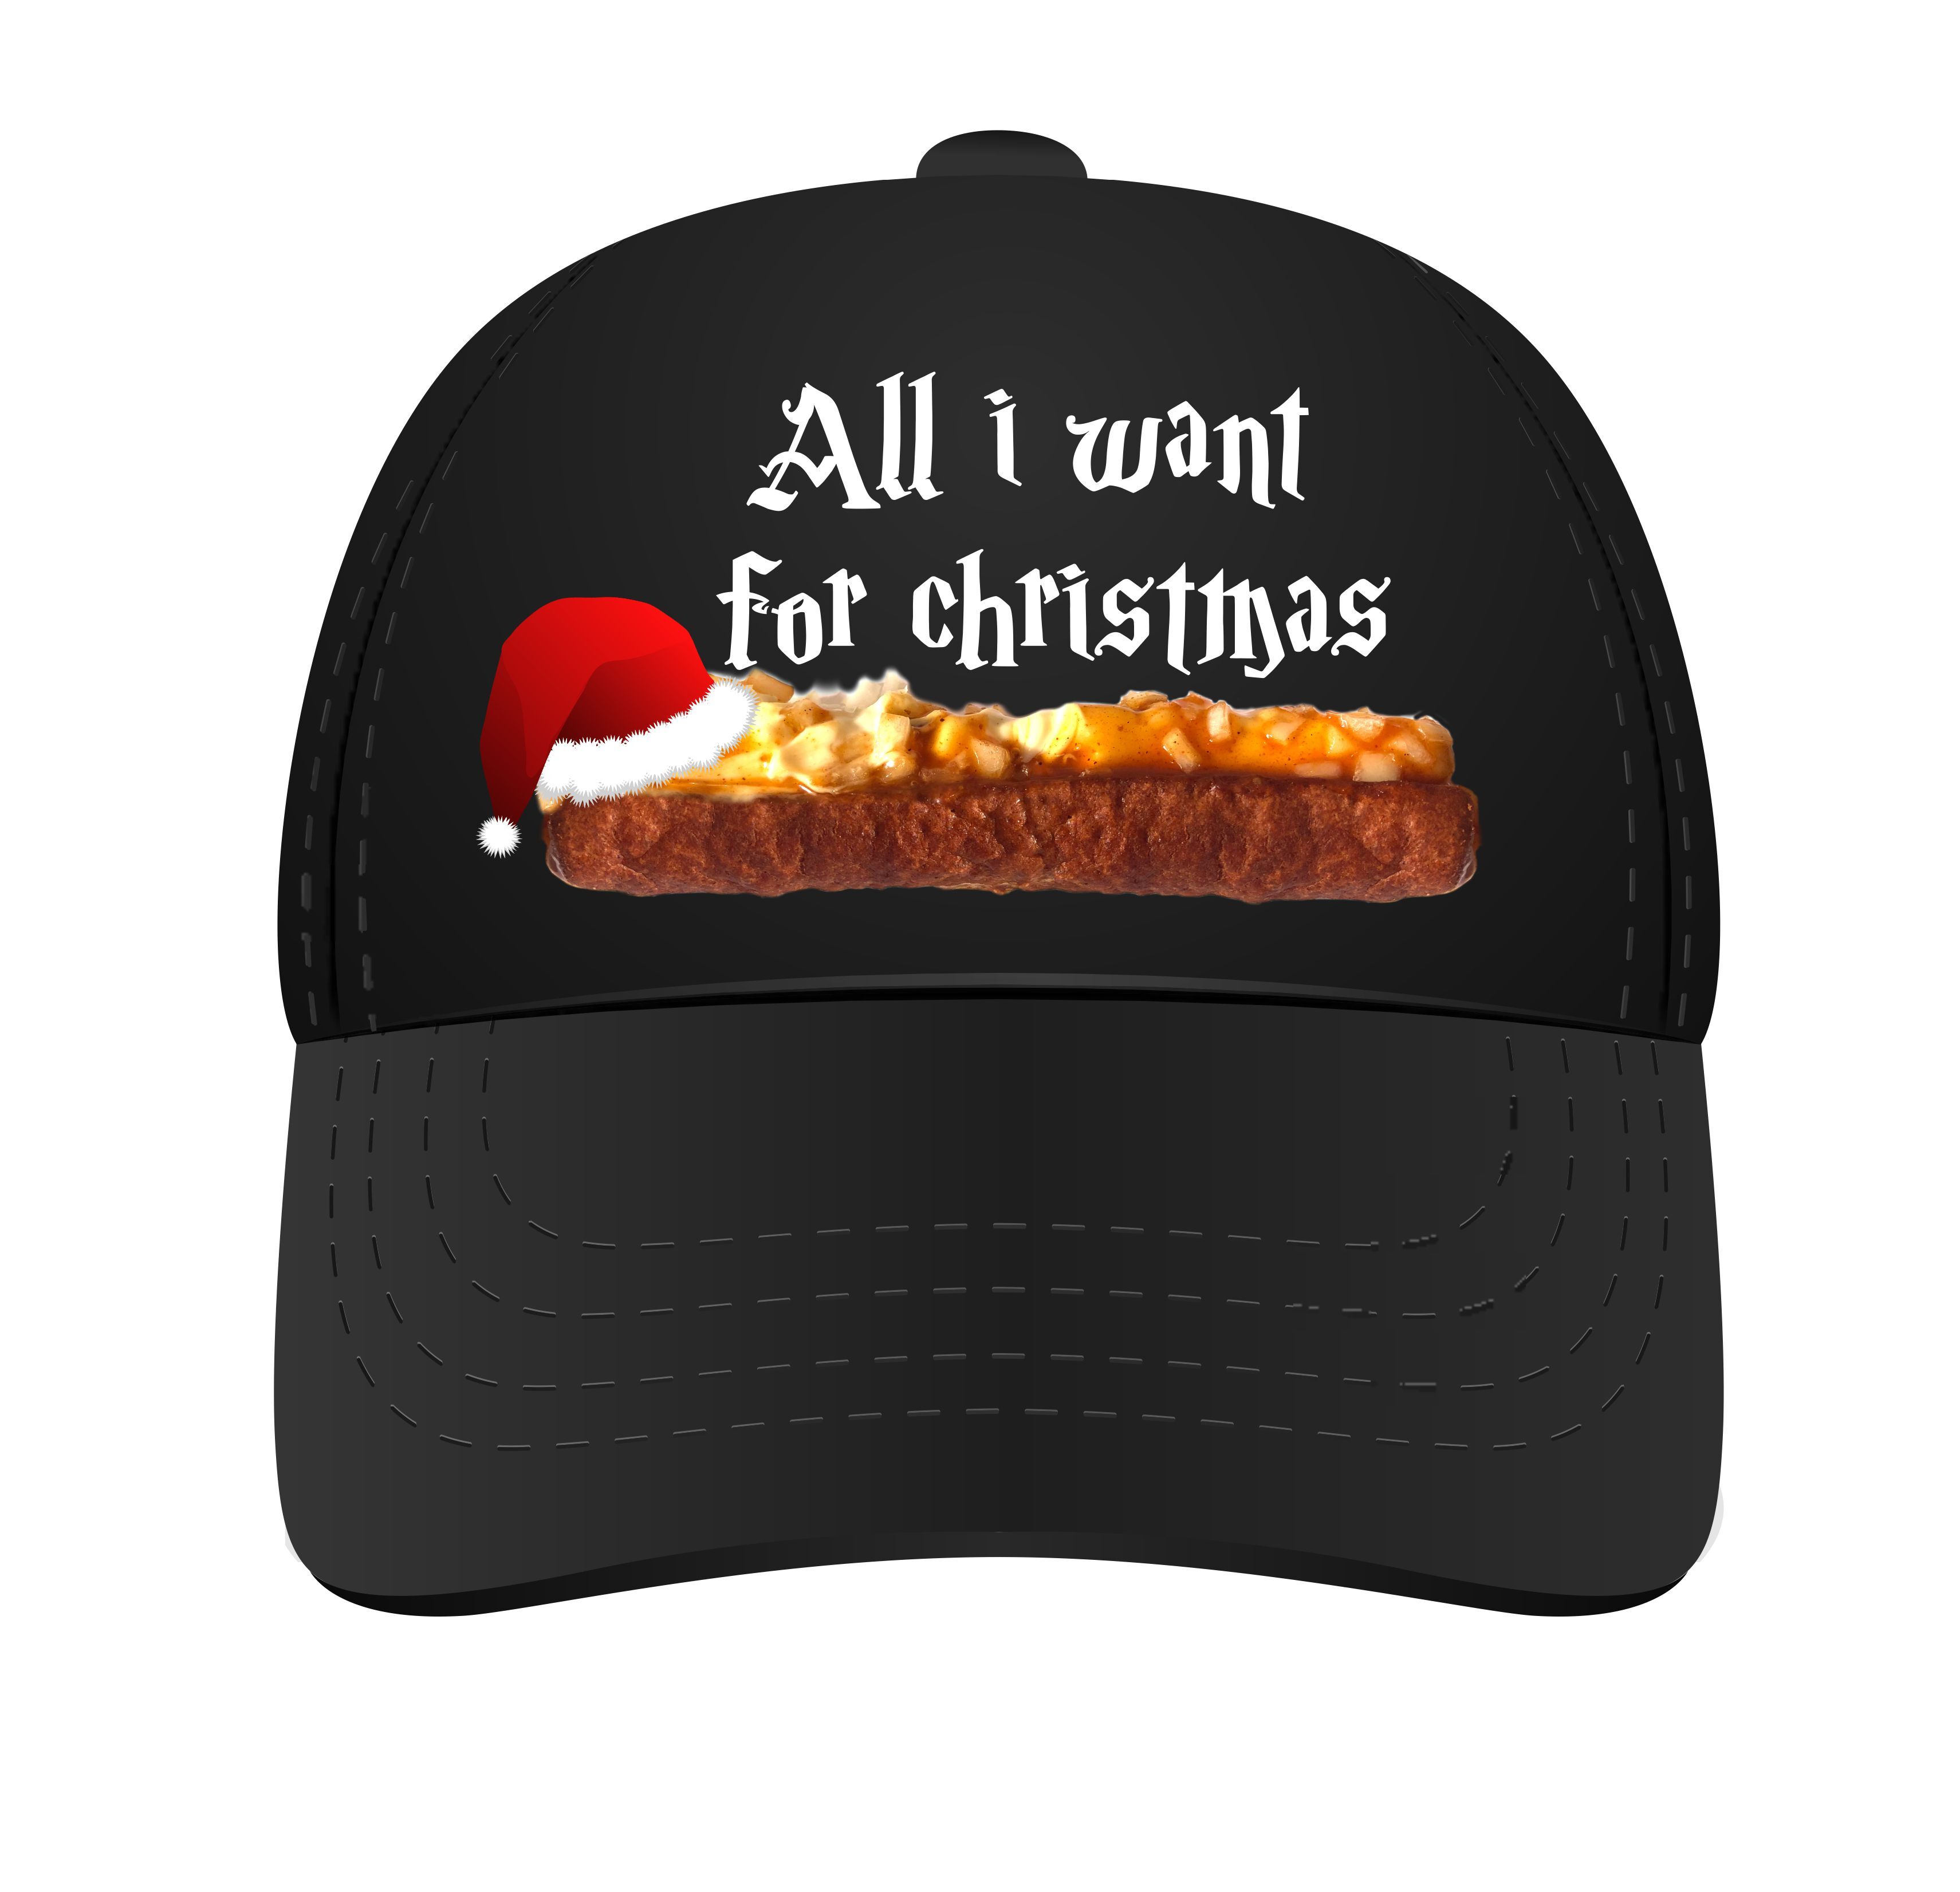 Kerst pet All i want for christmas is een frikandel speciaal